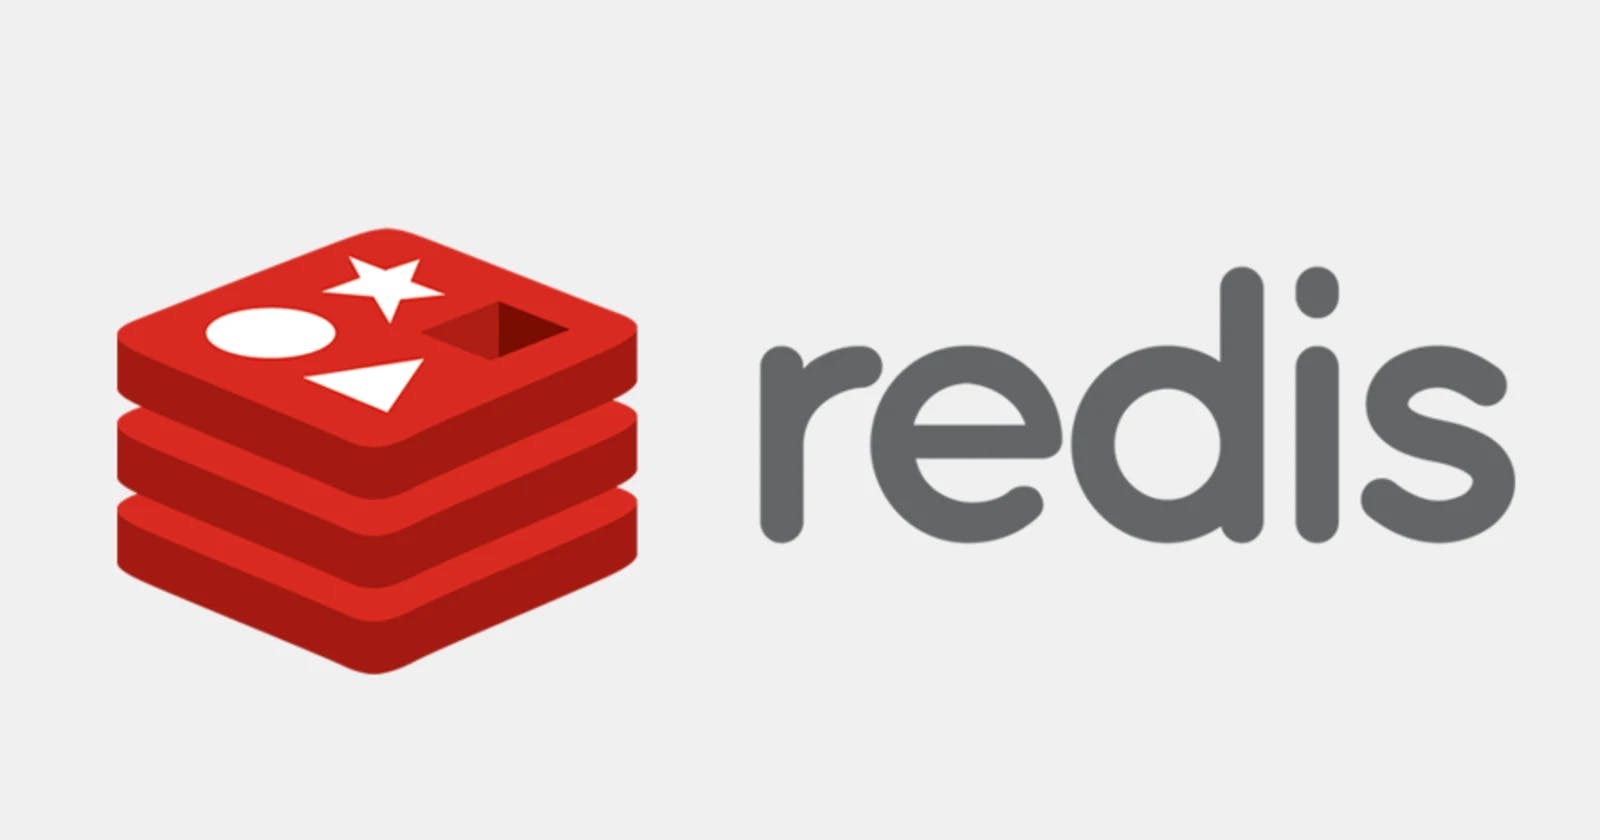 What is Redis?